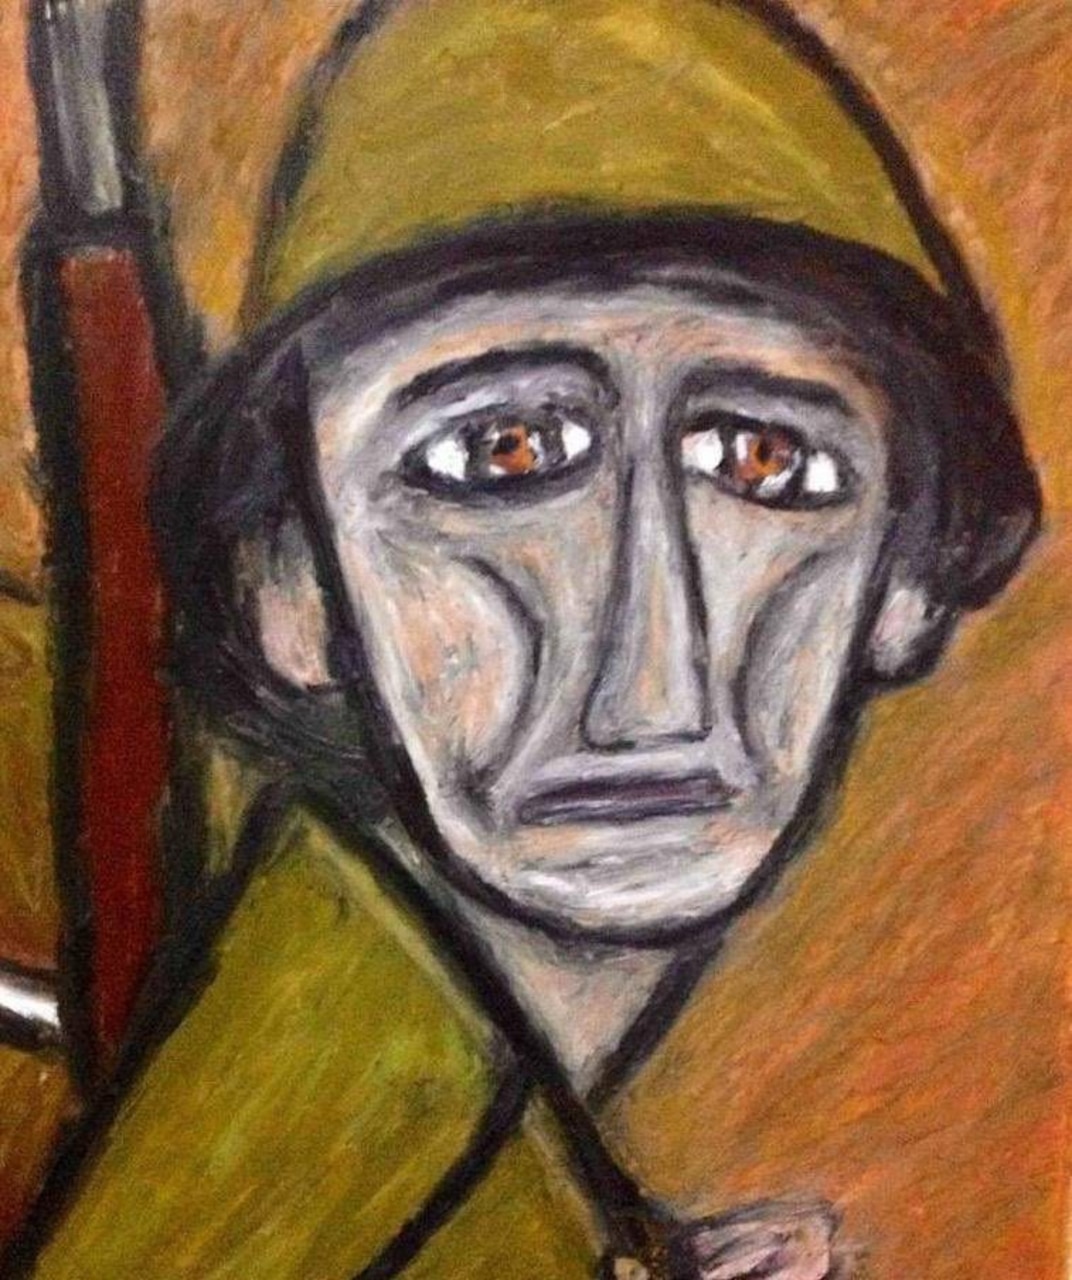 Illustration of a person in military uniform grieving.